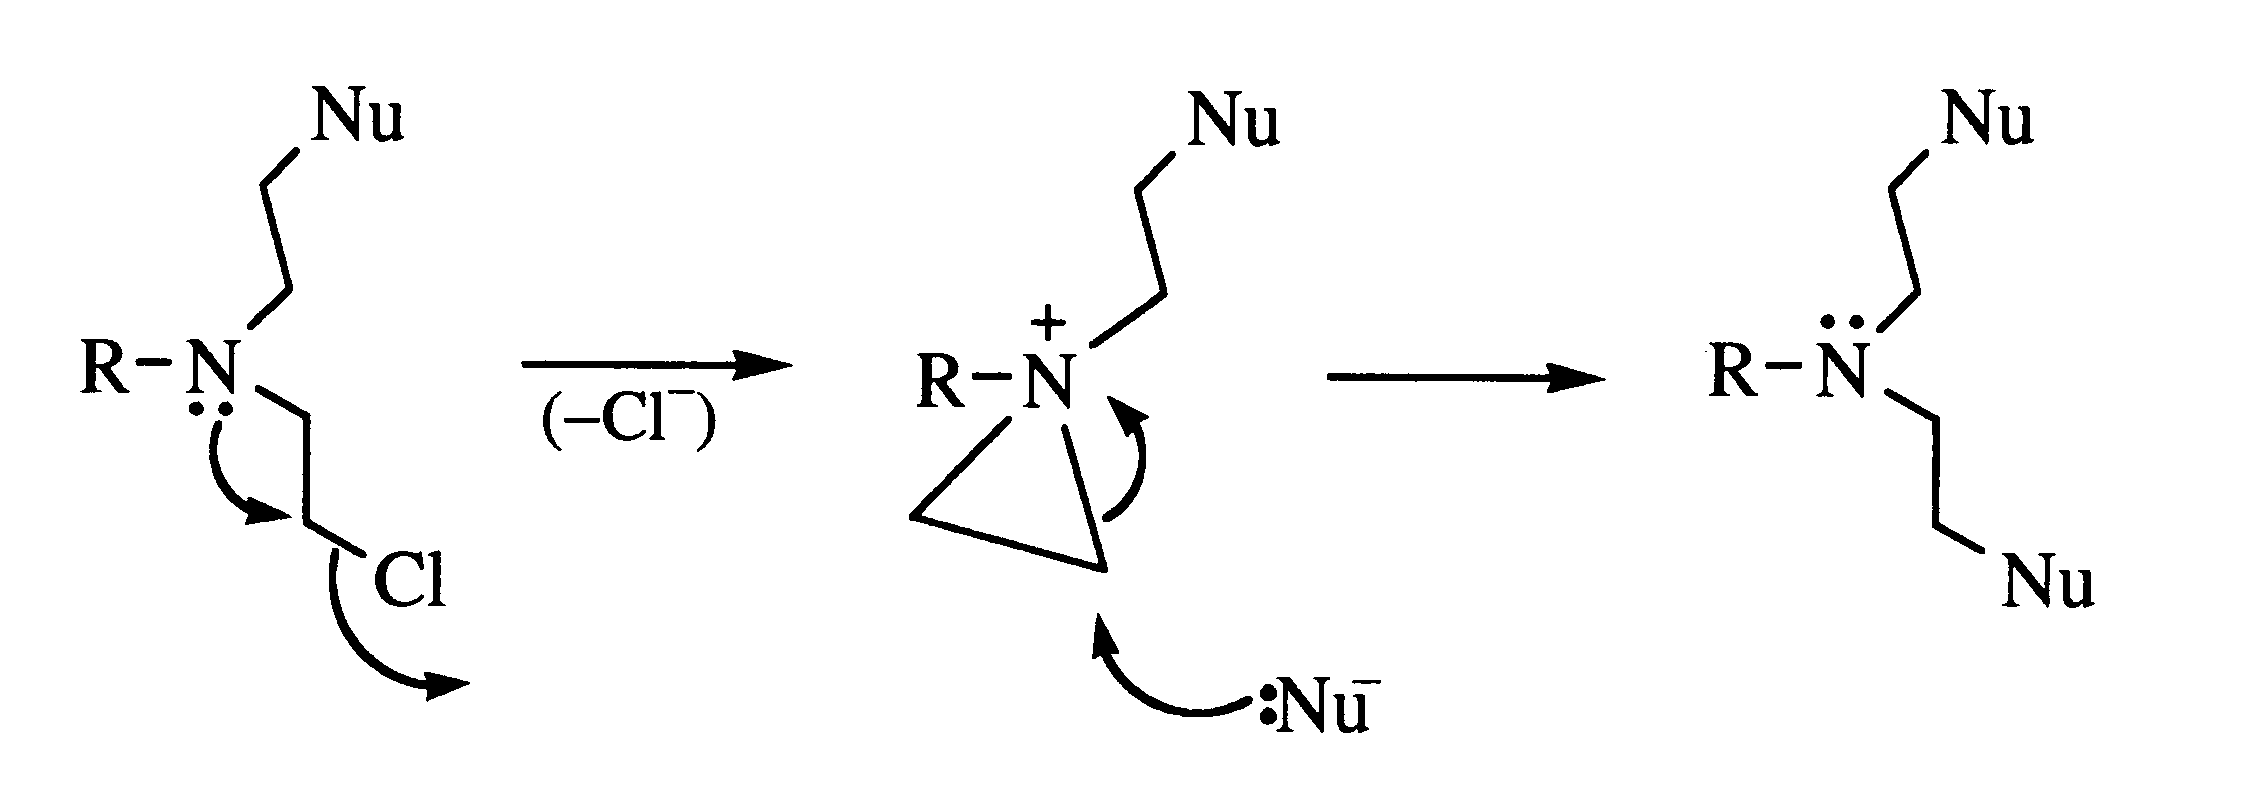 [Alkylation of Two Nucleic Acid Bases by Nitrogen Mustard]